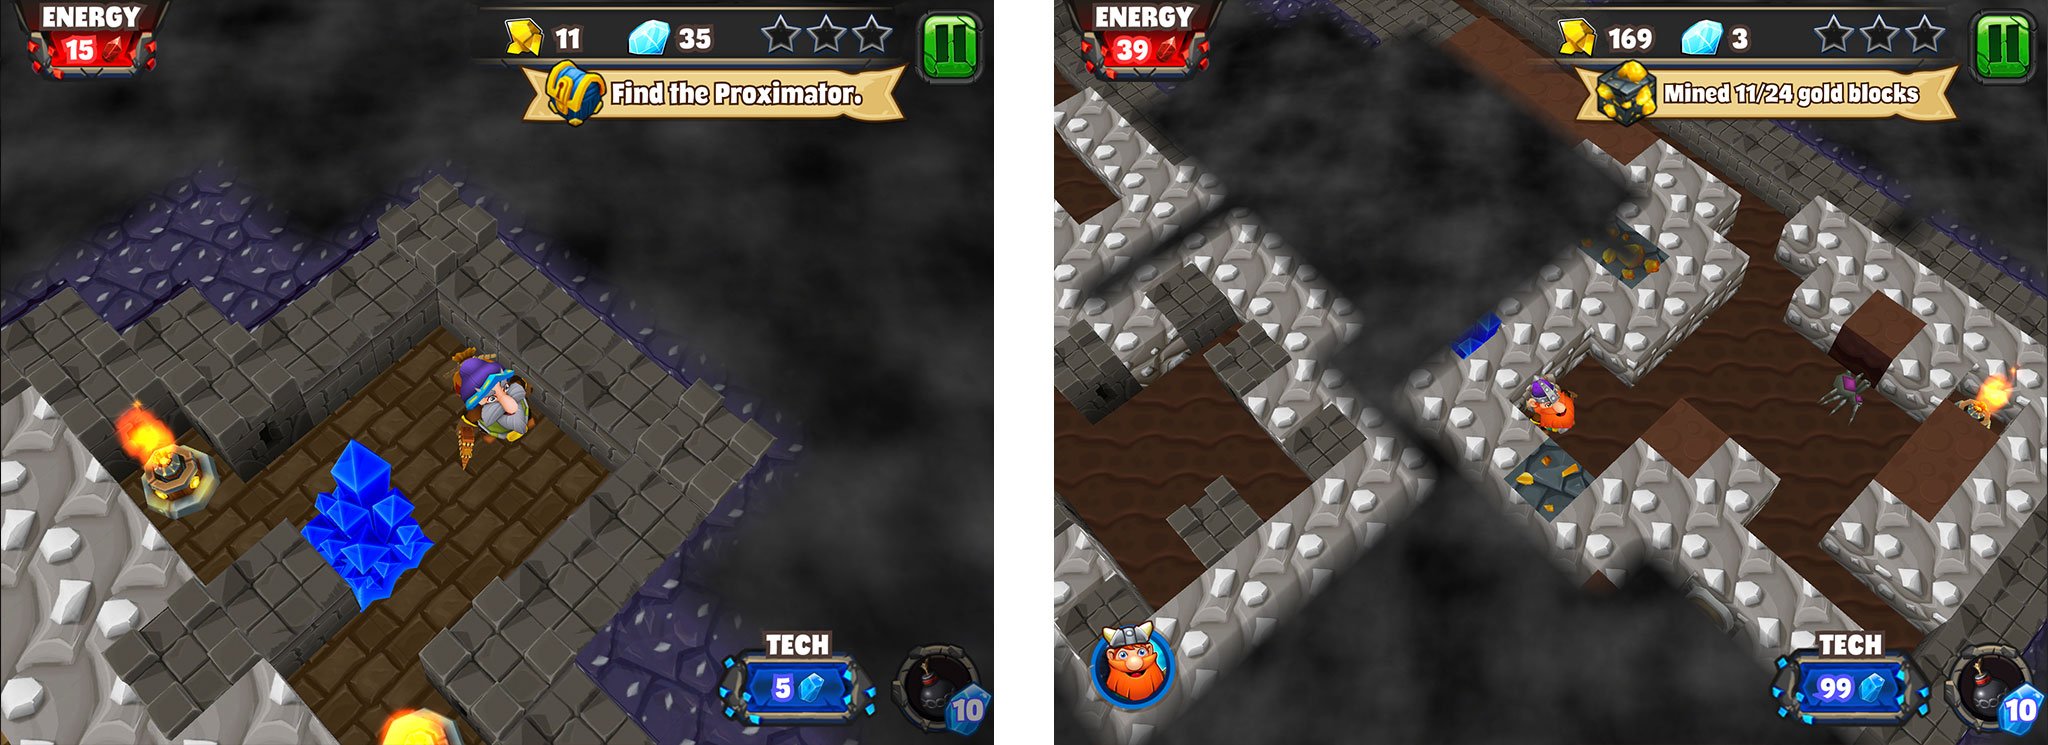 Dwarven Den: Top 10 tips, hints, and cheats to blazing a path to buried treasure!